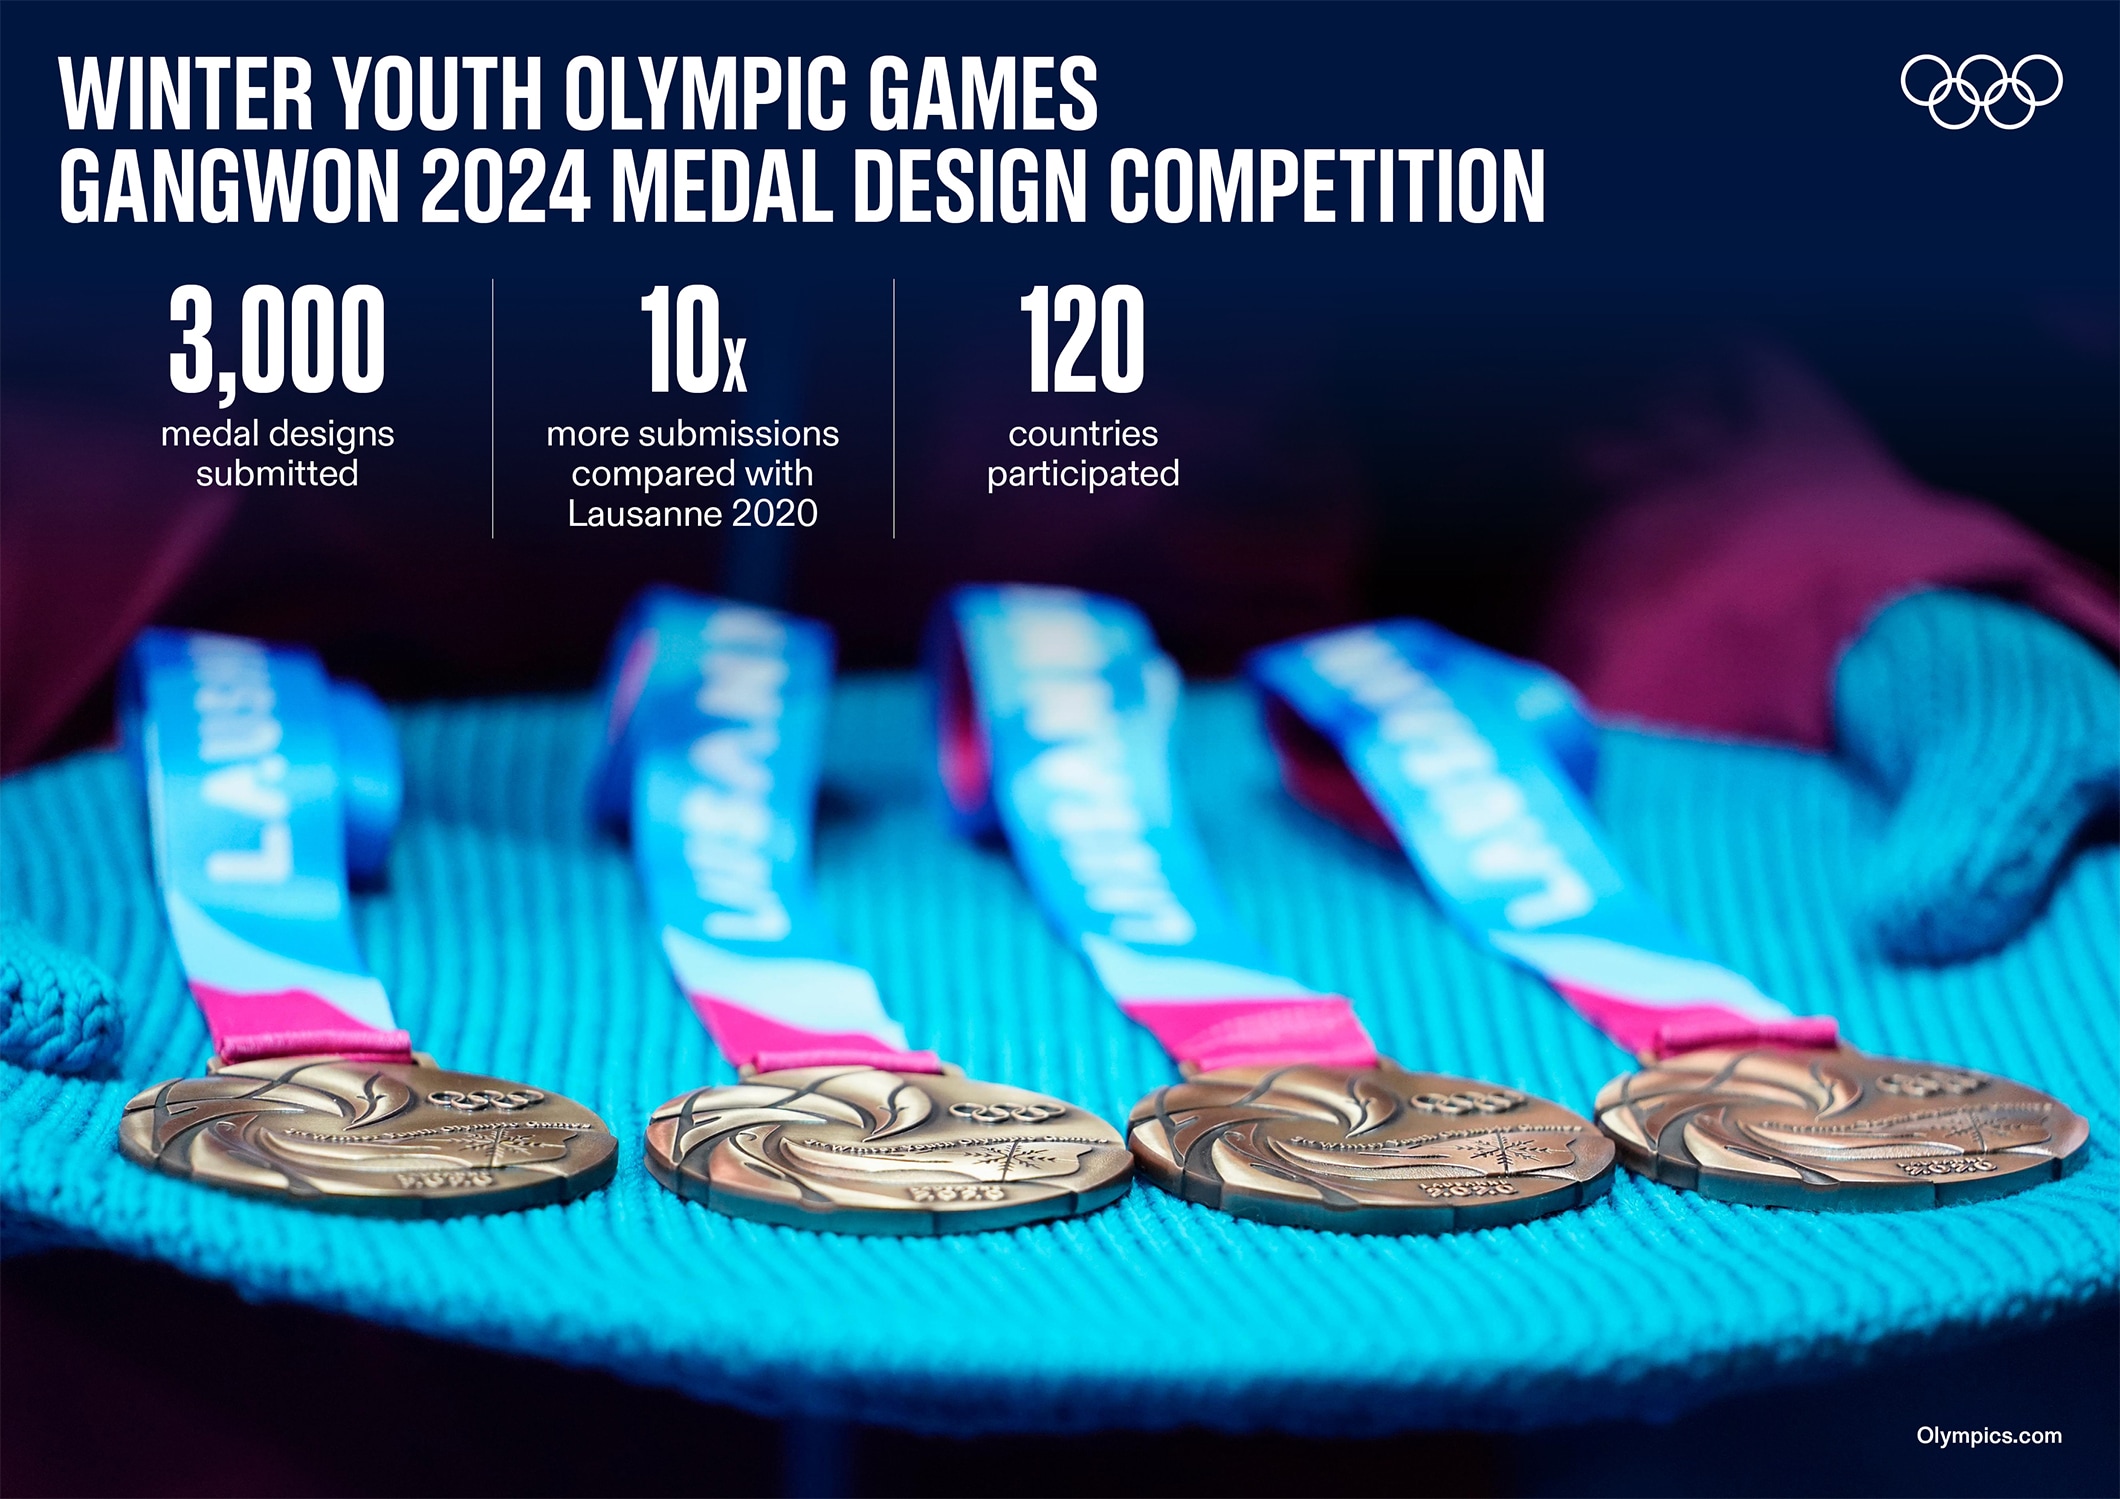 Recordbreaking 3,000 designs submitted for the Winter Youth Olympic